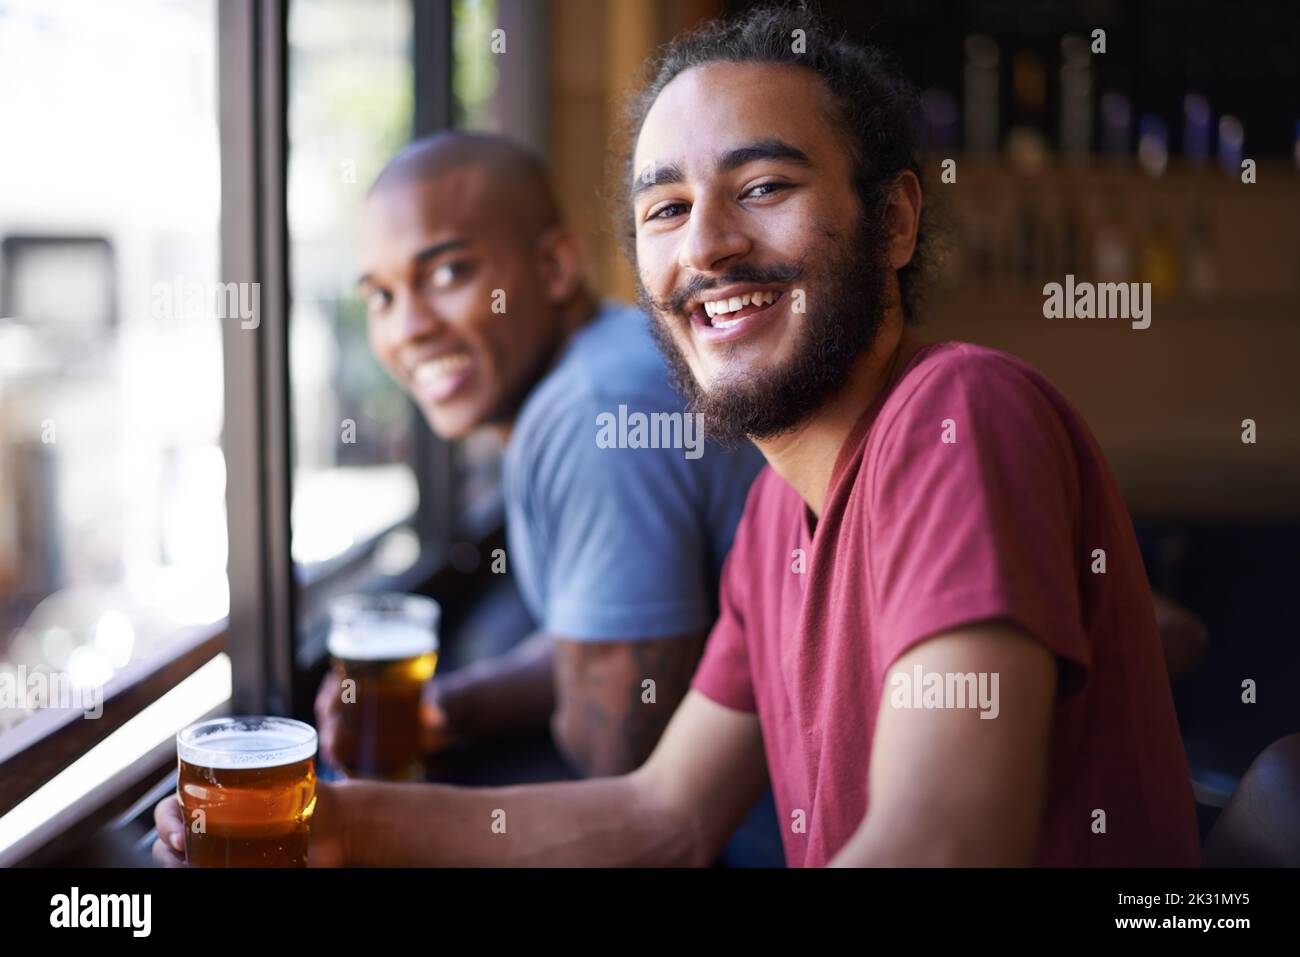 A good laugh over a good beer. A cropped shot of friends sitting in a bar drinking beers. Stock Photo